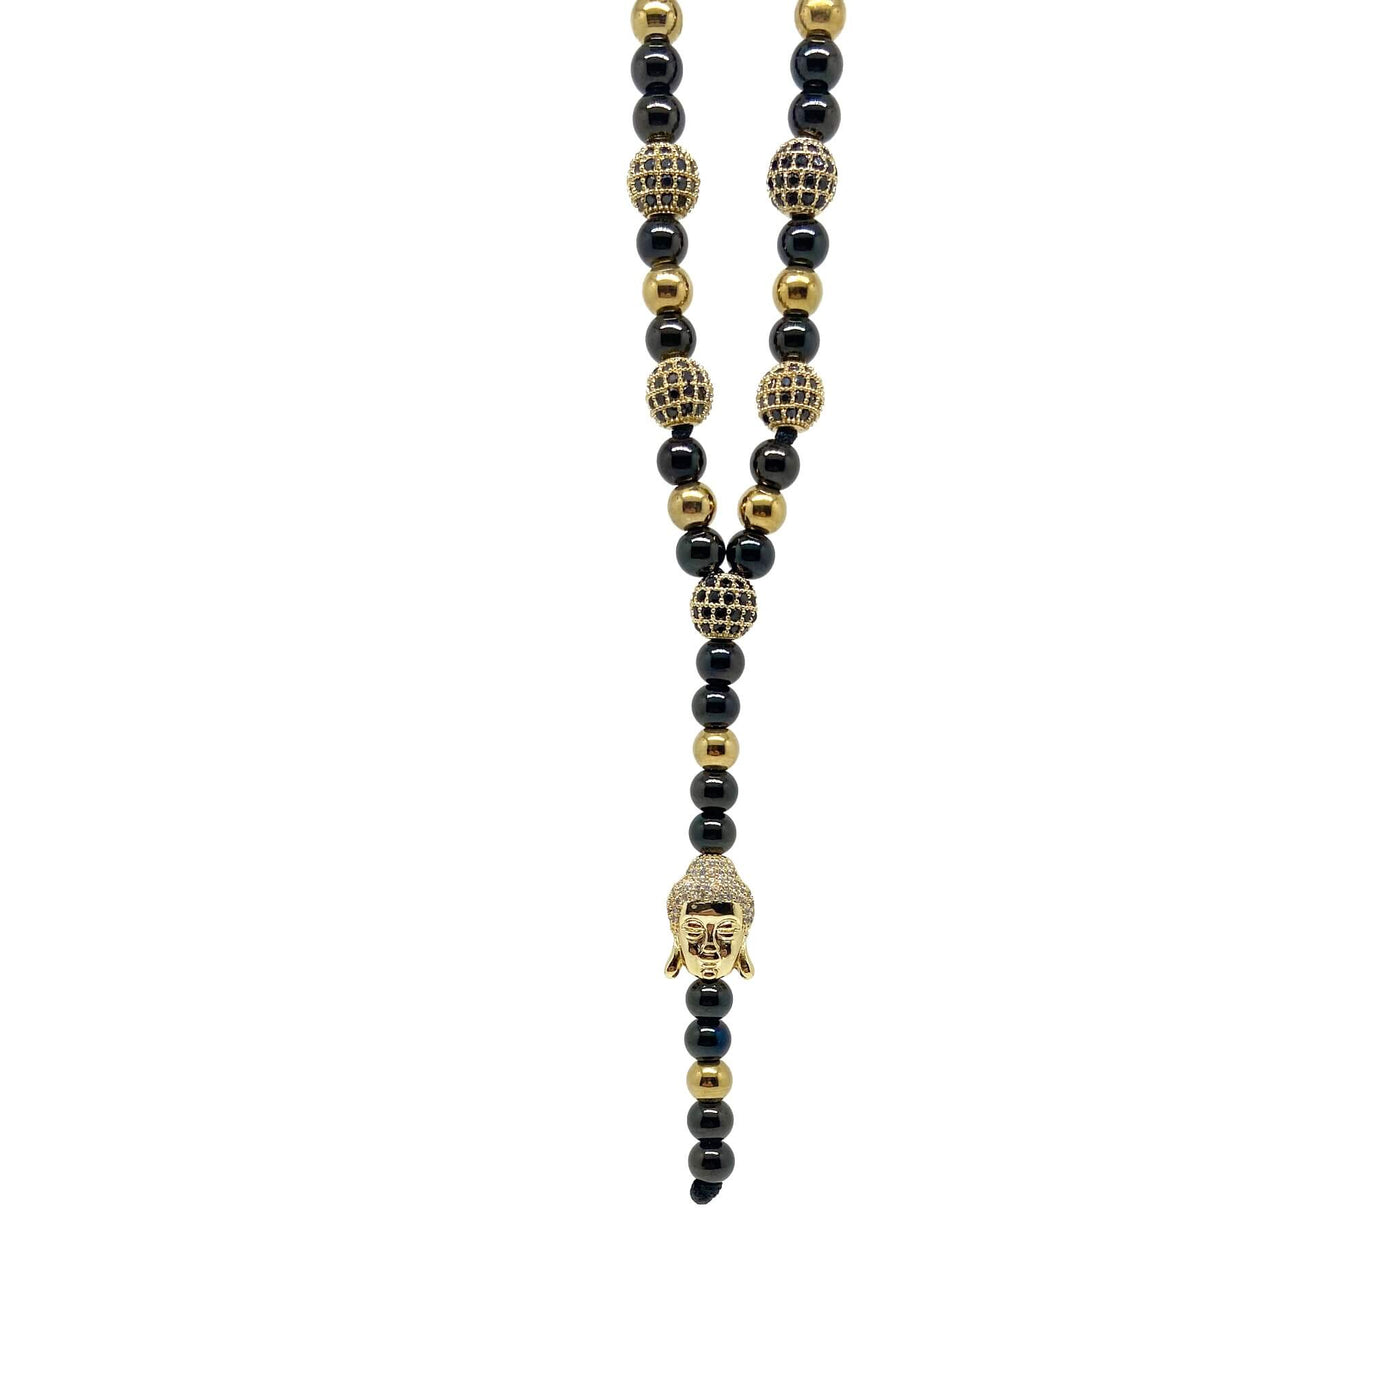 The Gold and Black Buddha Necklace